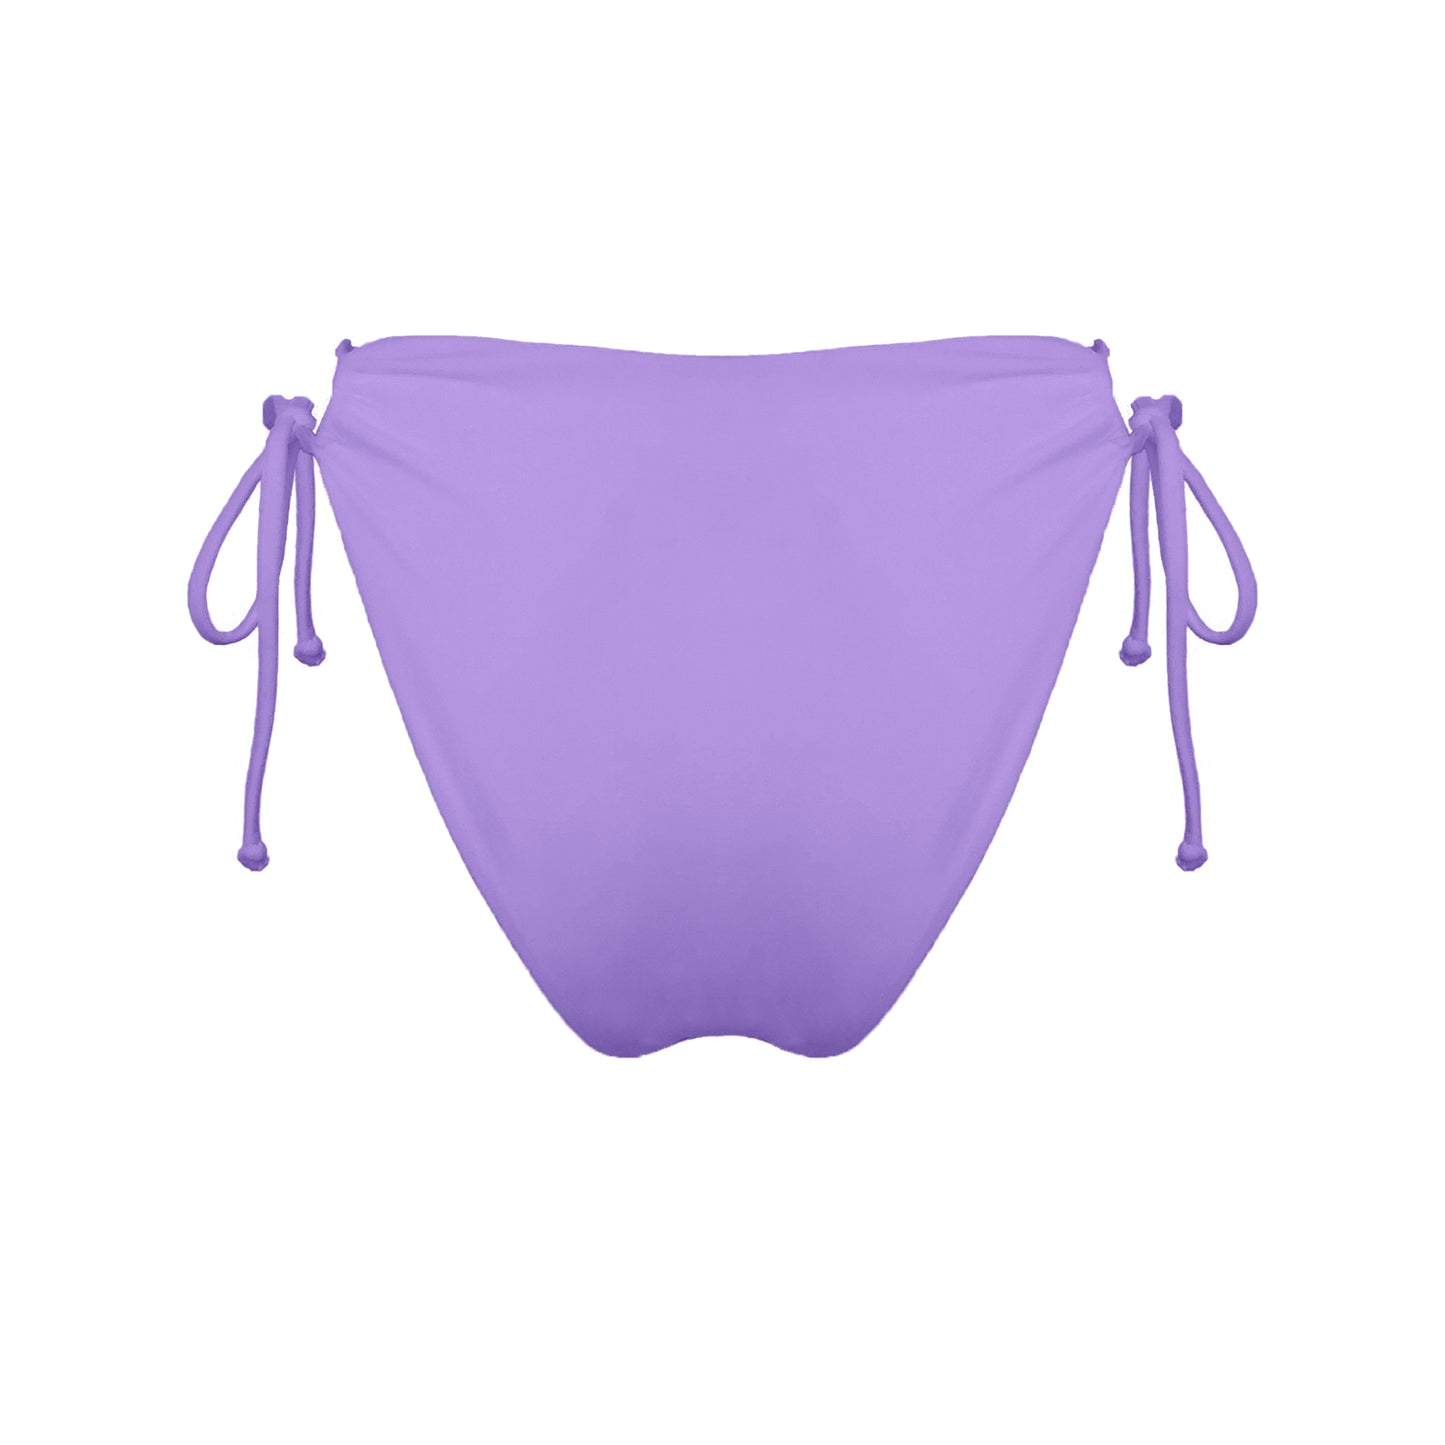 Back view of pastel purple strappy mid-rise bikini bottoms with high cut legs and cheeky coverage.